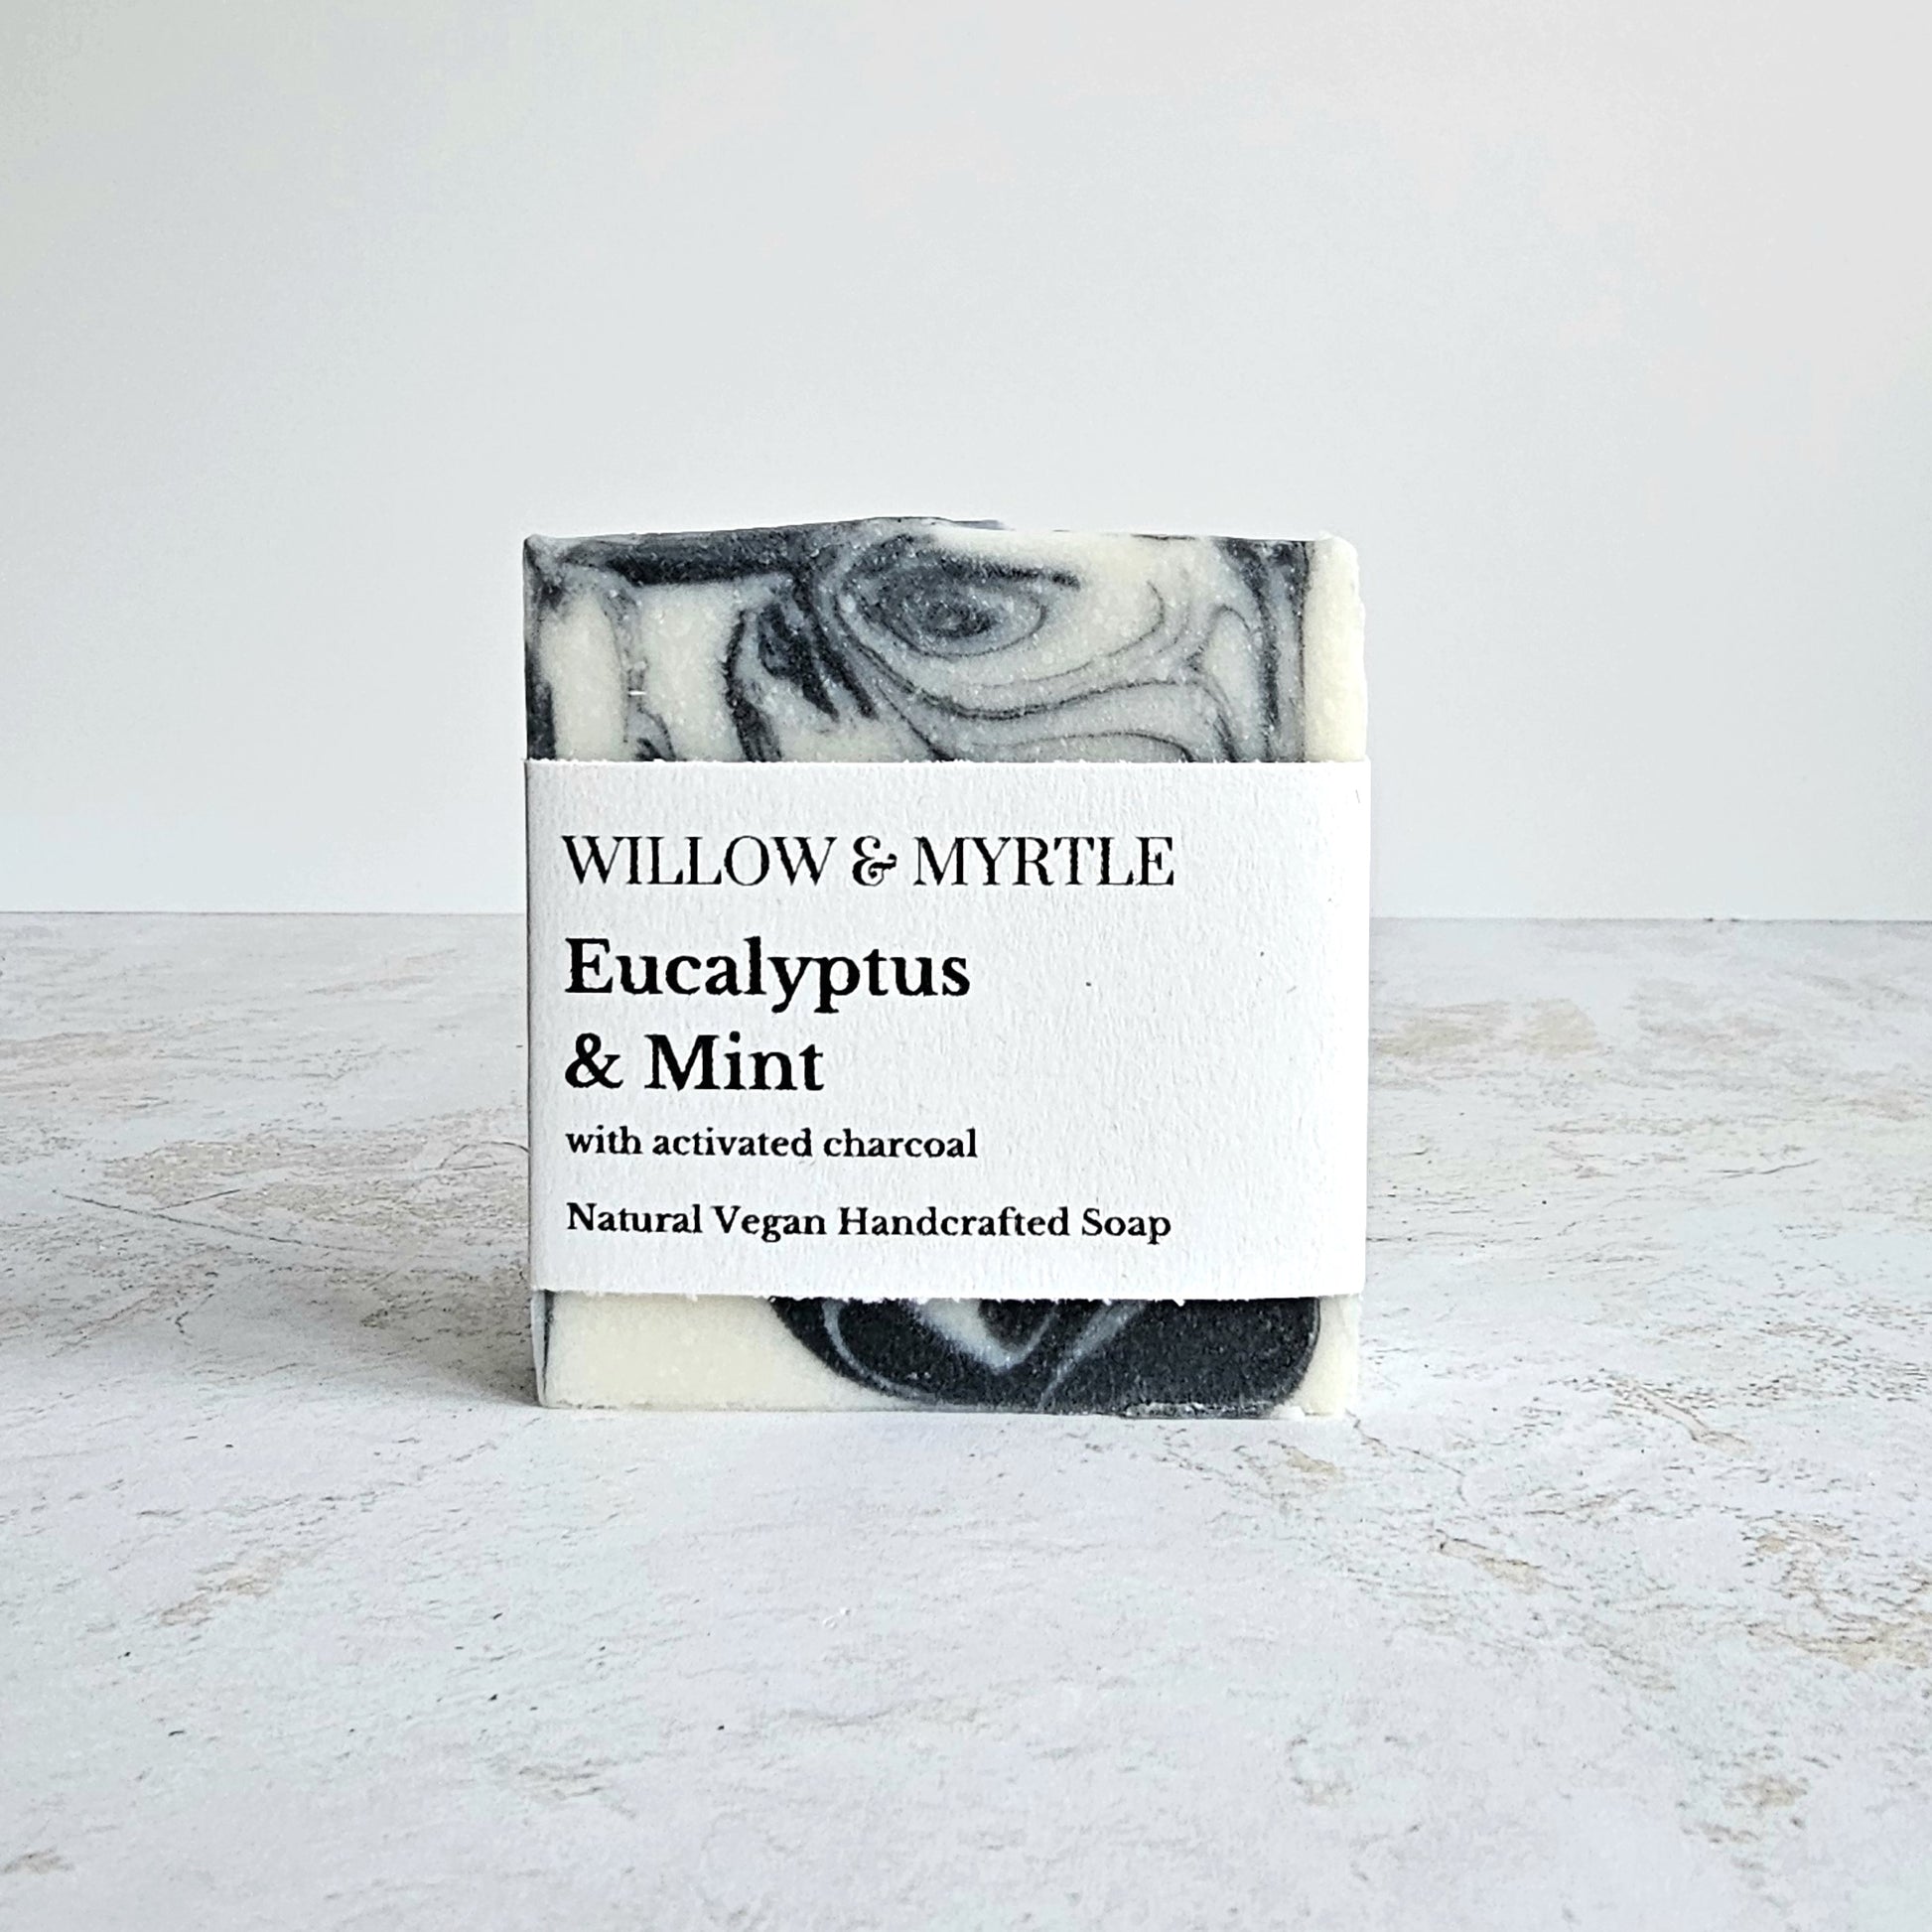 activated charcoal soap, natural vegan handmade, eucalyptus and mint essential oils